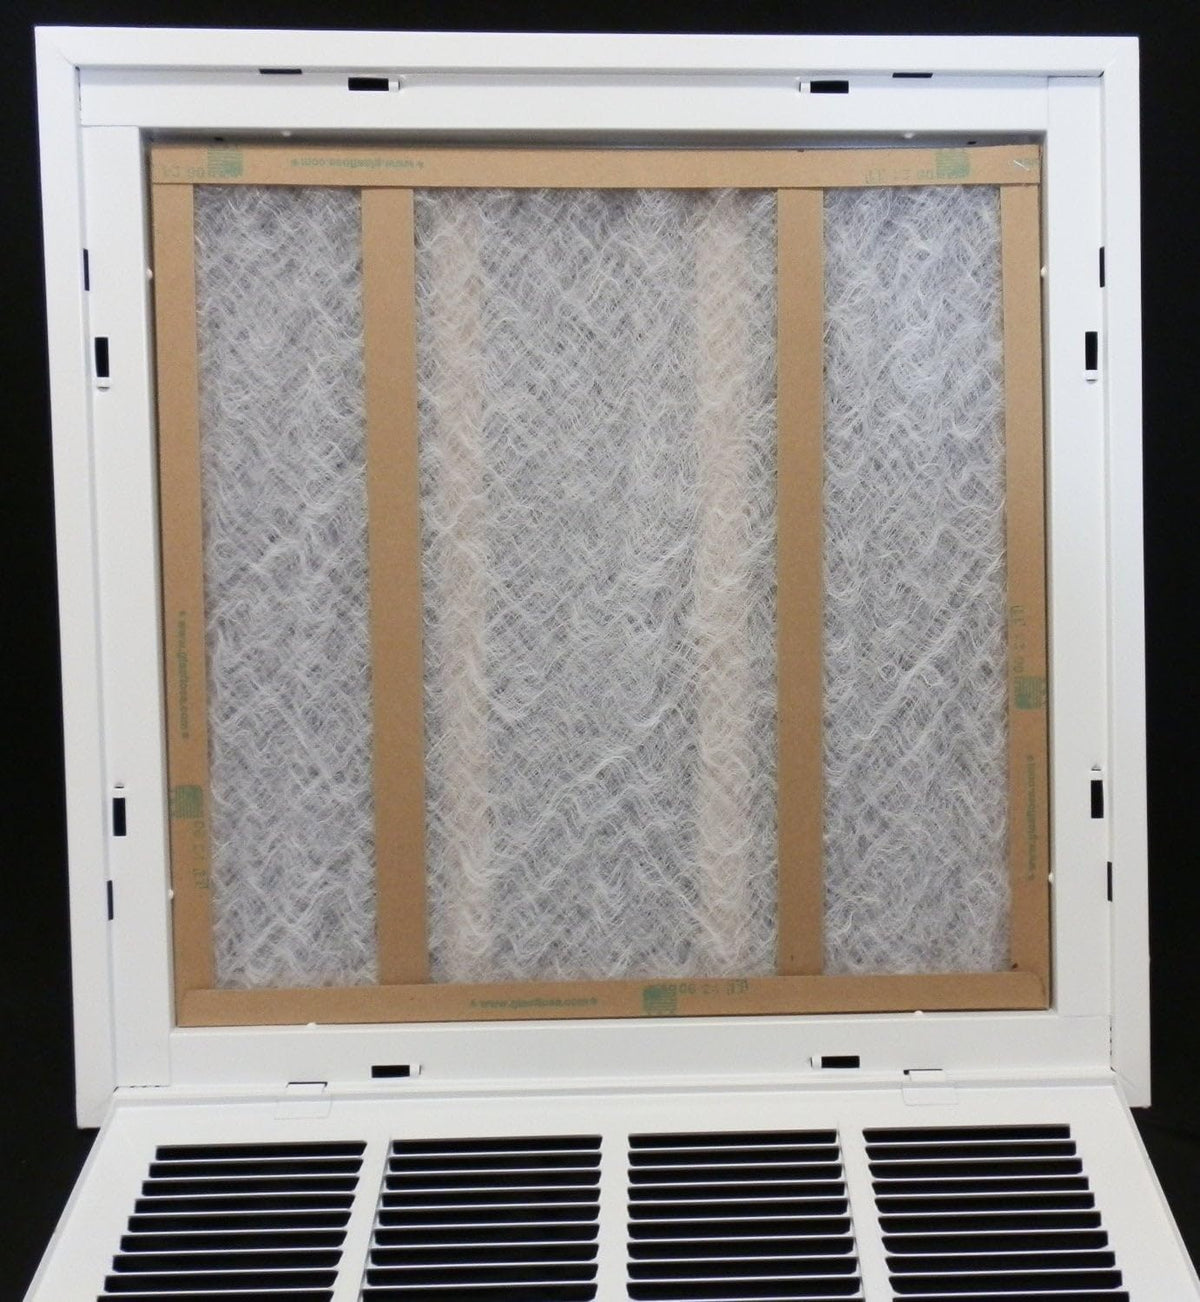 10&quot; X 36&quot; Steel Return Air Filter Grille for 1&quot; Filter - Removable Frame - [Outer Dimensions: 12 5/8&quot; X 38 5/8&quot;]